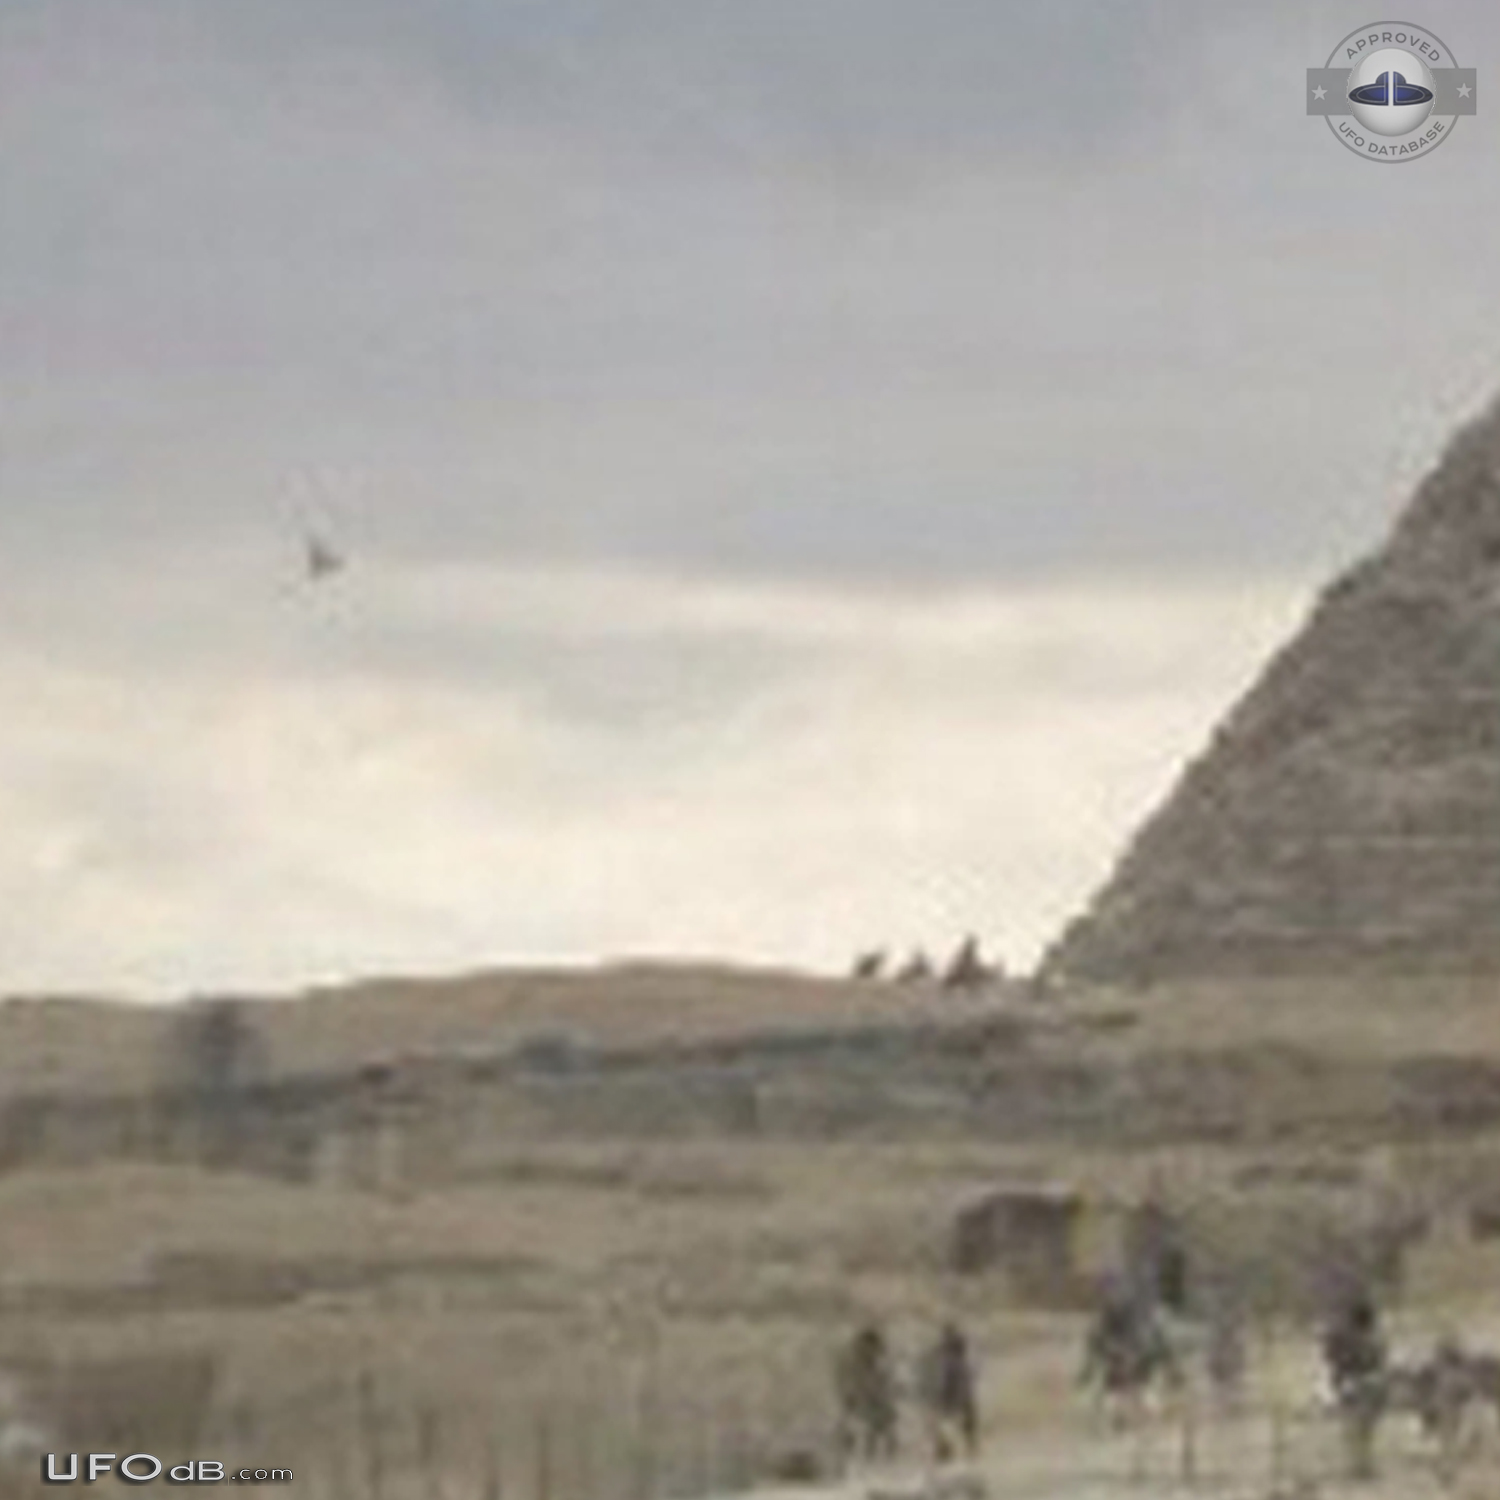 Picture reveal Triangular UFO on the left of a Pyramid in Egypt - 2011 UFO Picture #657-5